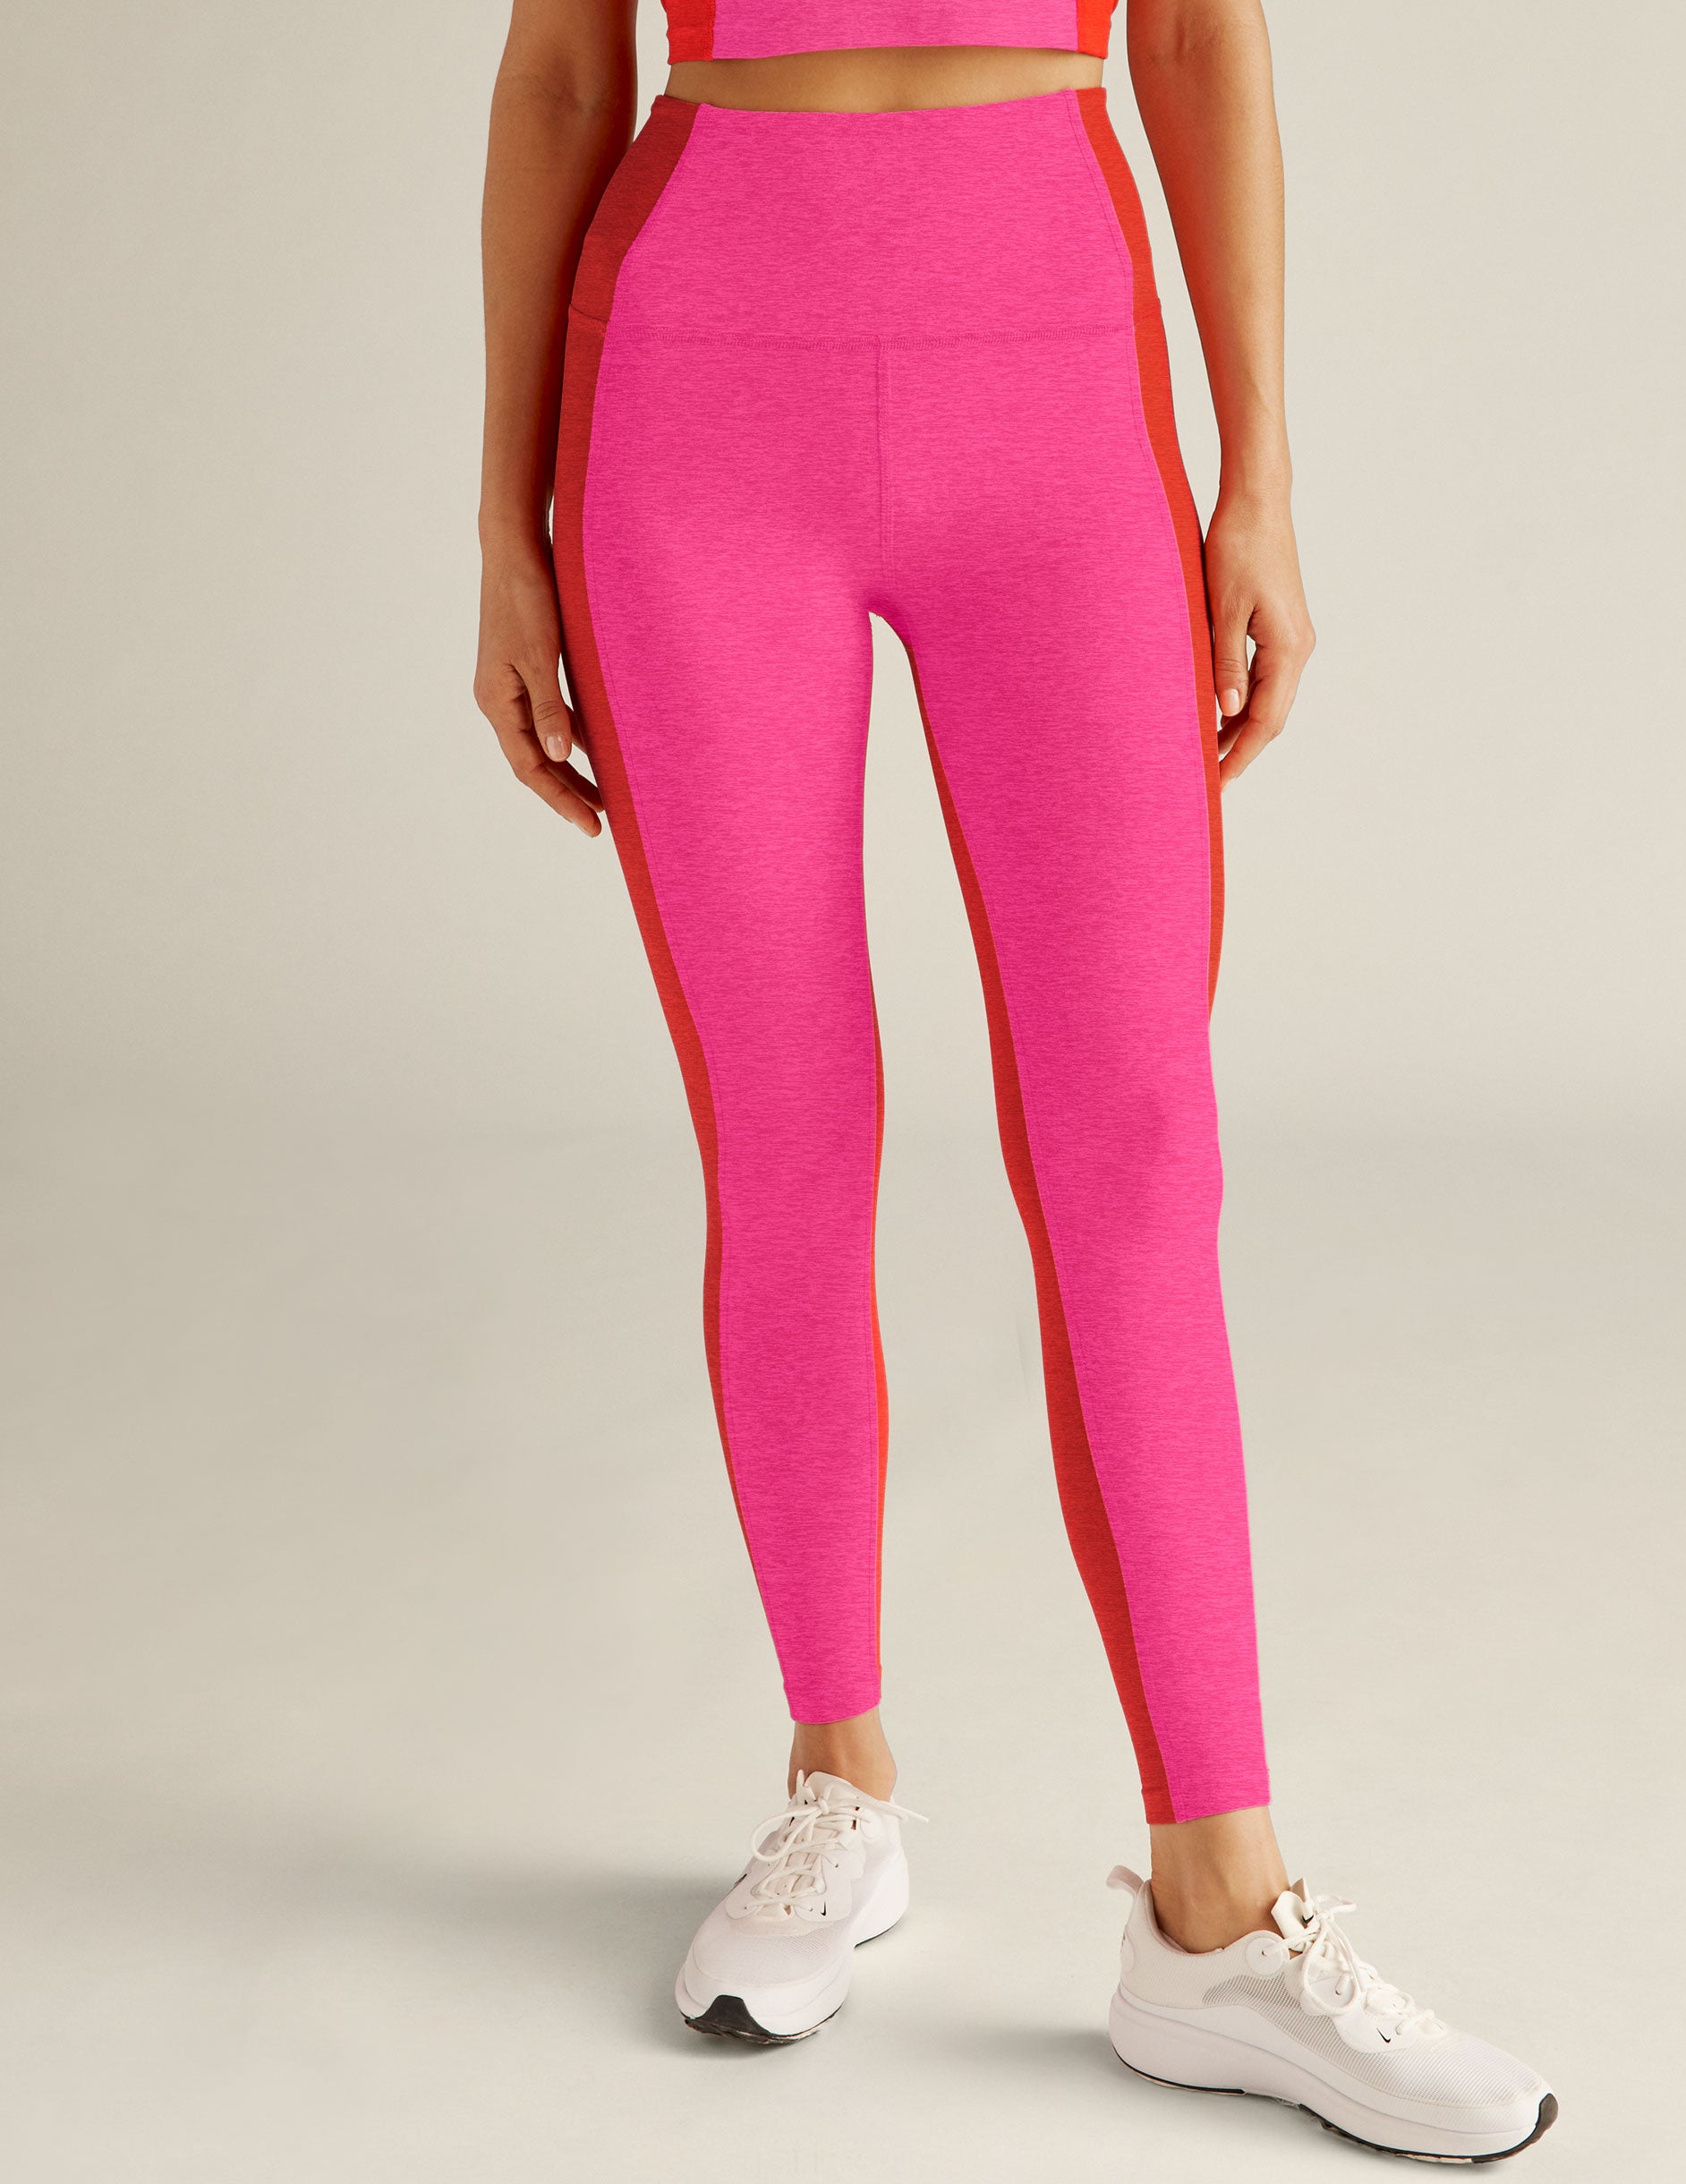 Southern Tide Colorblock High Waisted Legging - REDIX